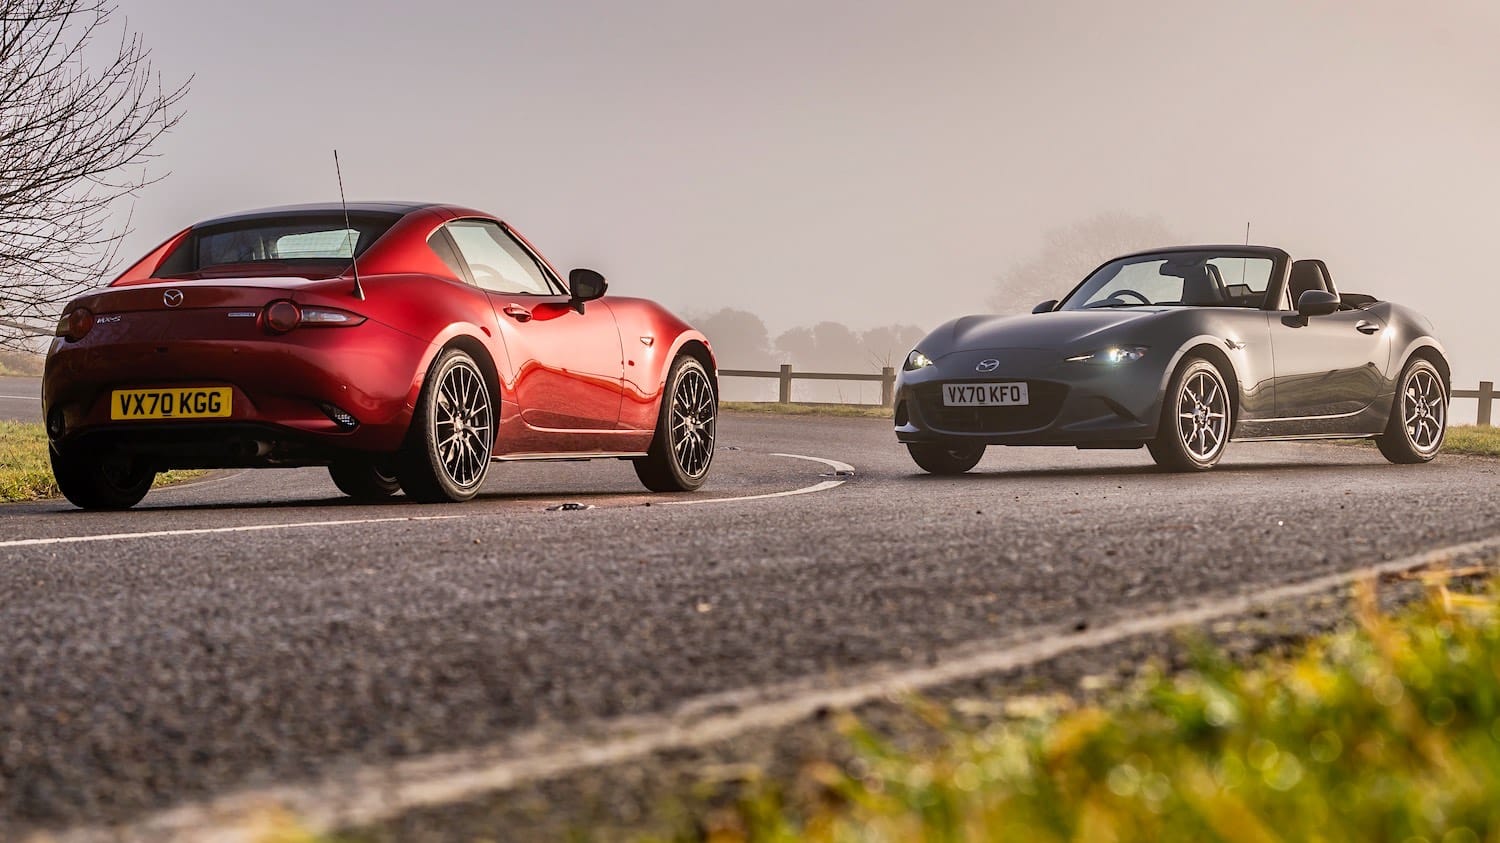 Mazda MX-5 RF – What’s your favourite car?